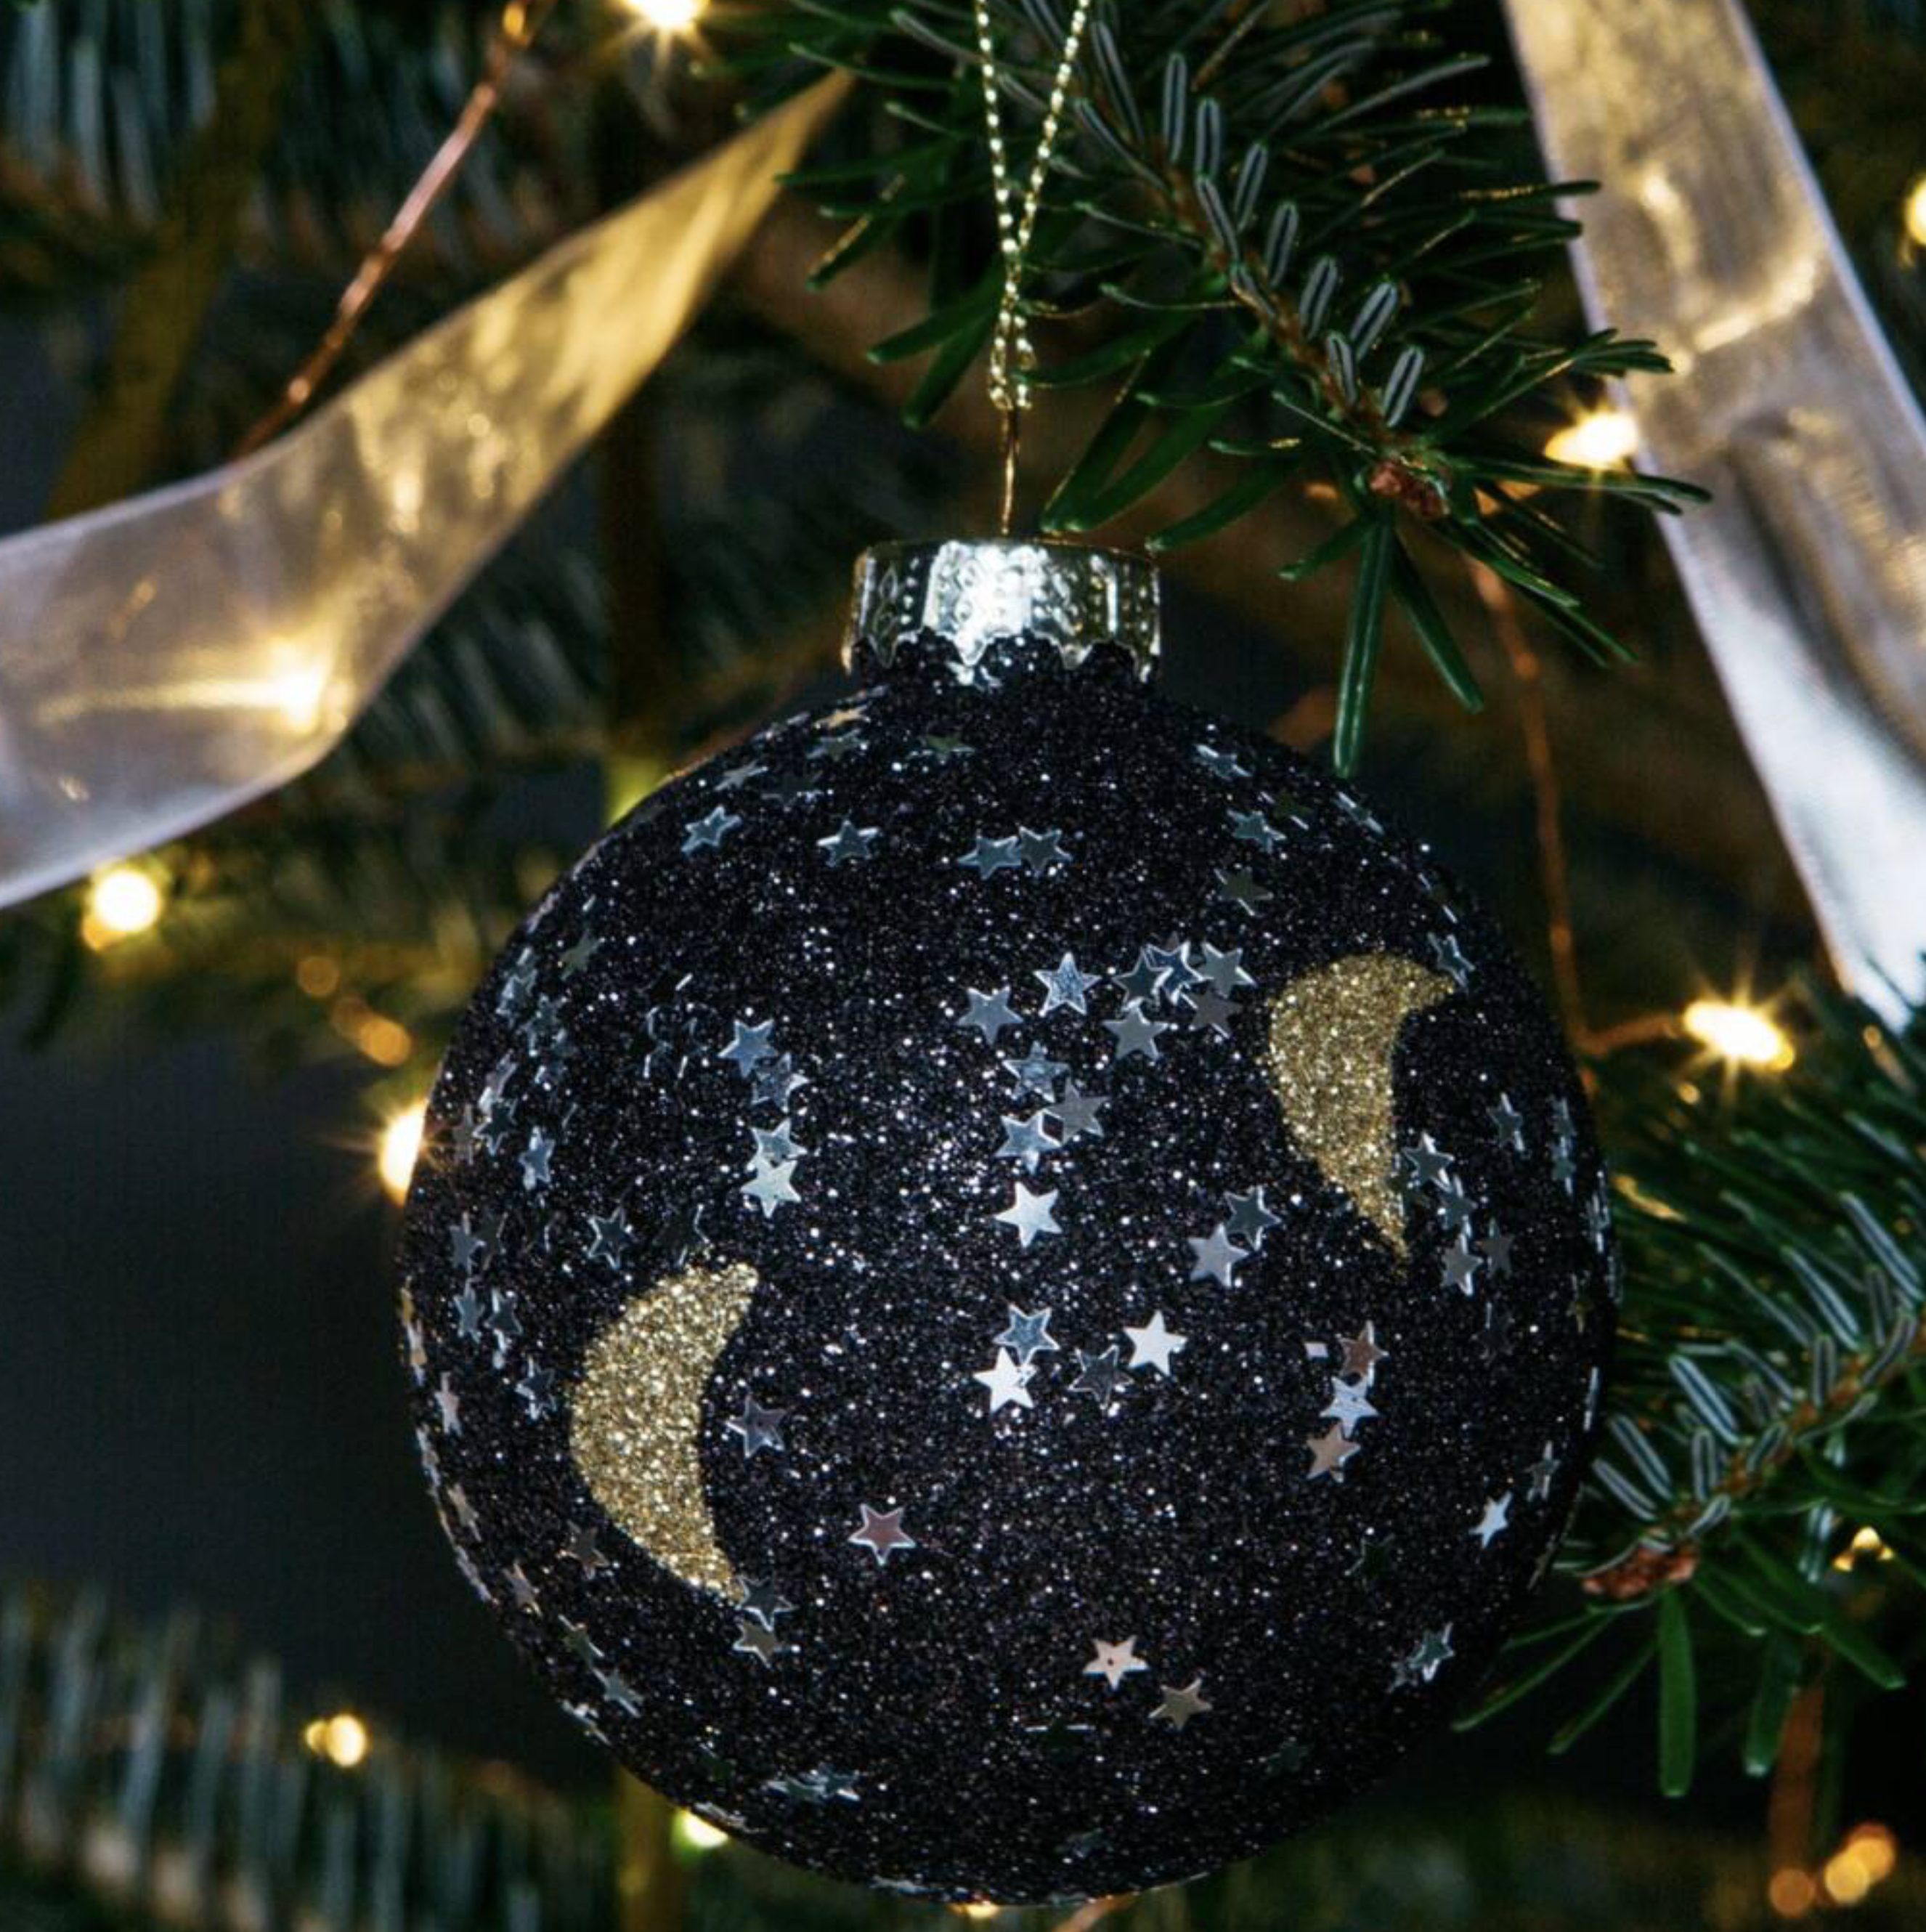 Luxe Glitter Star And Moon Bauble